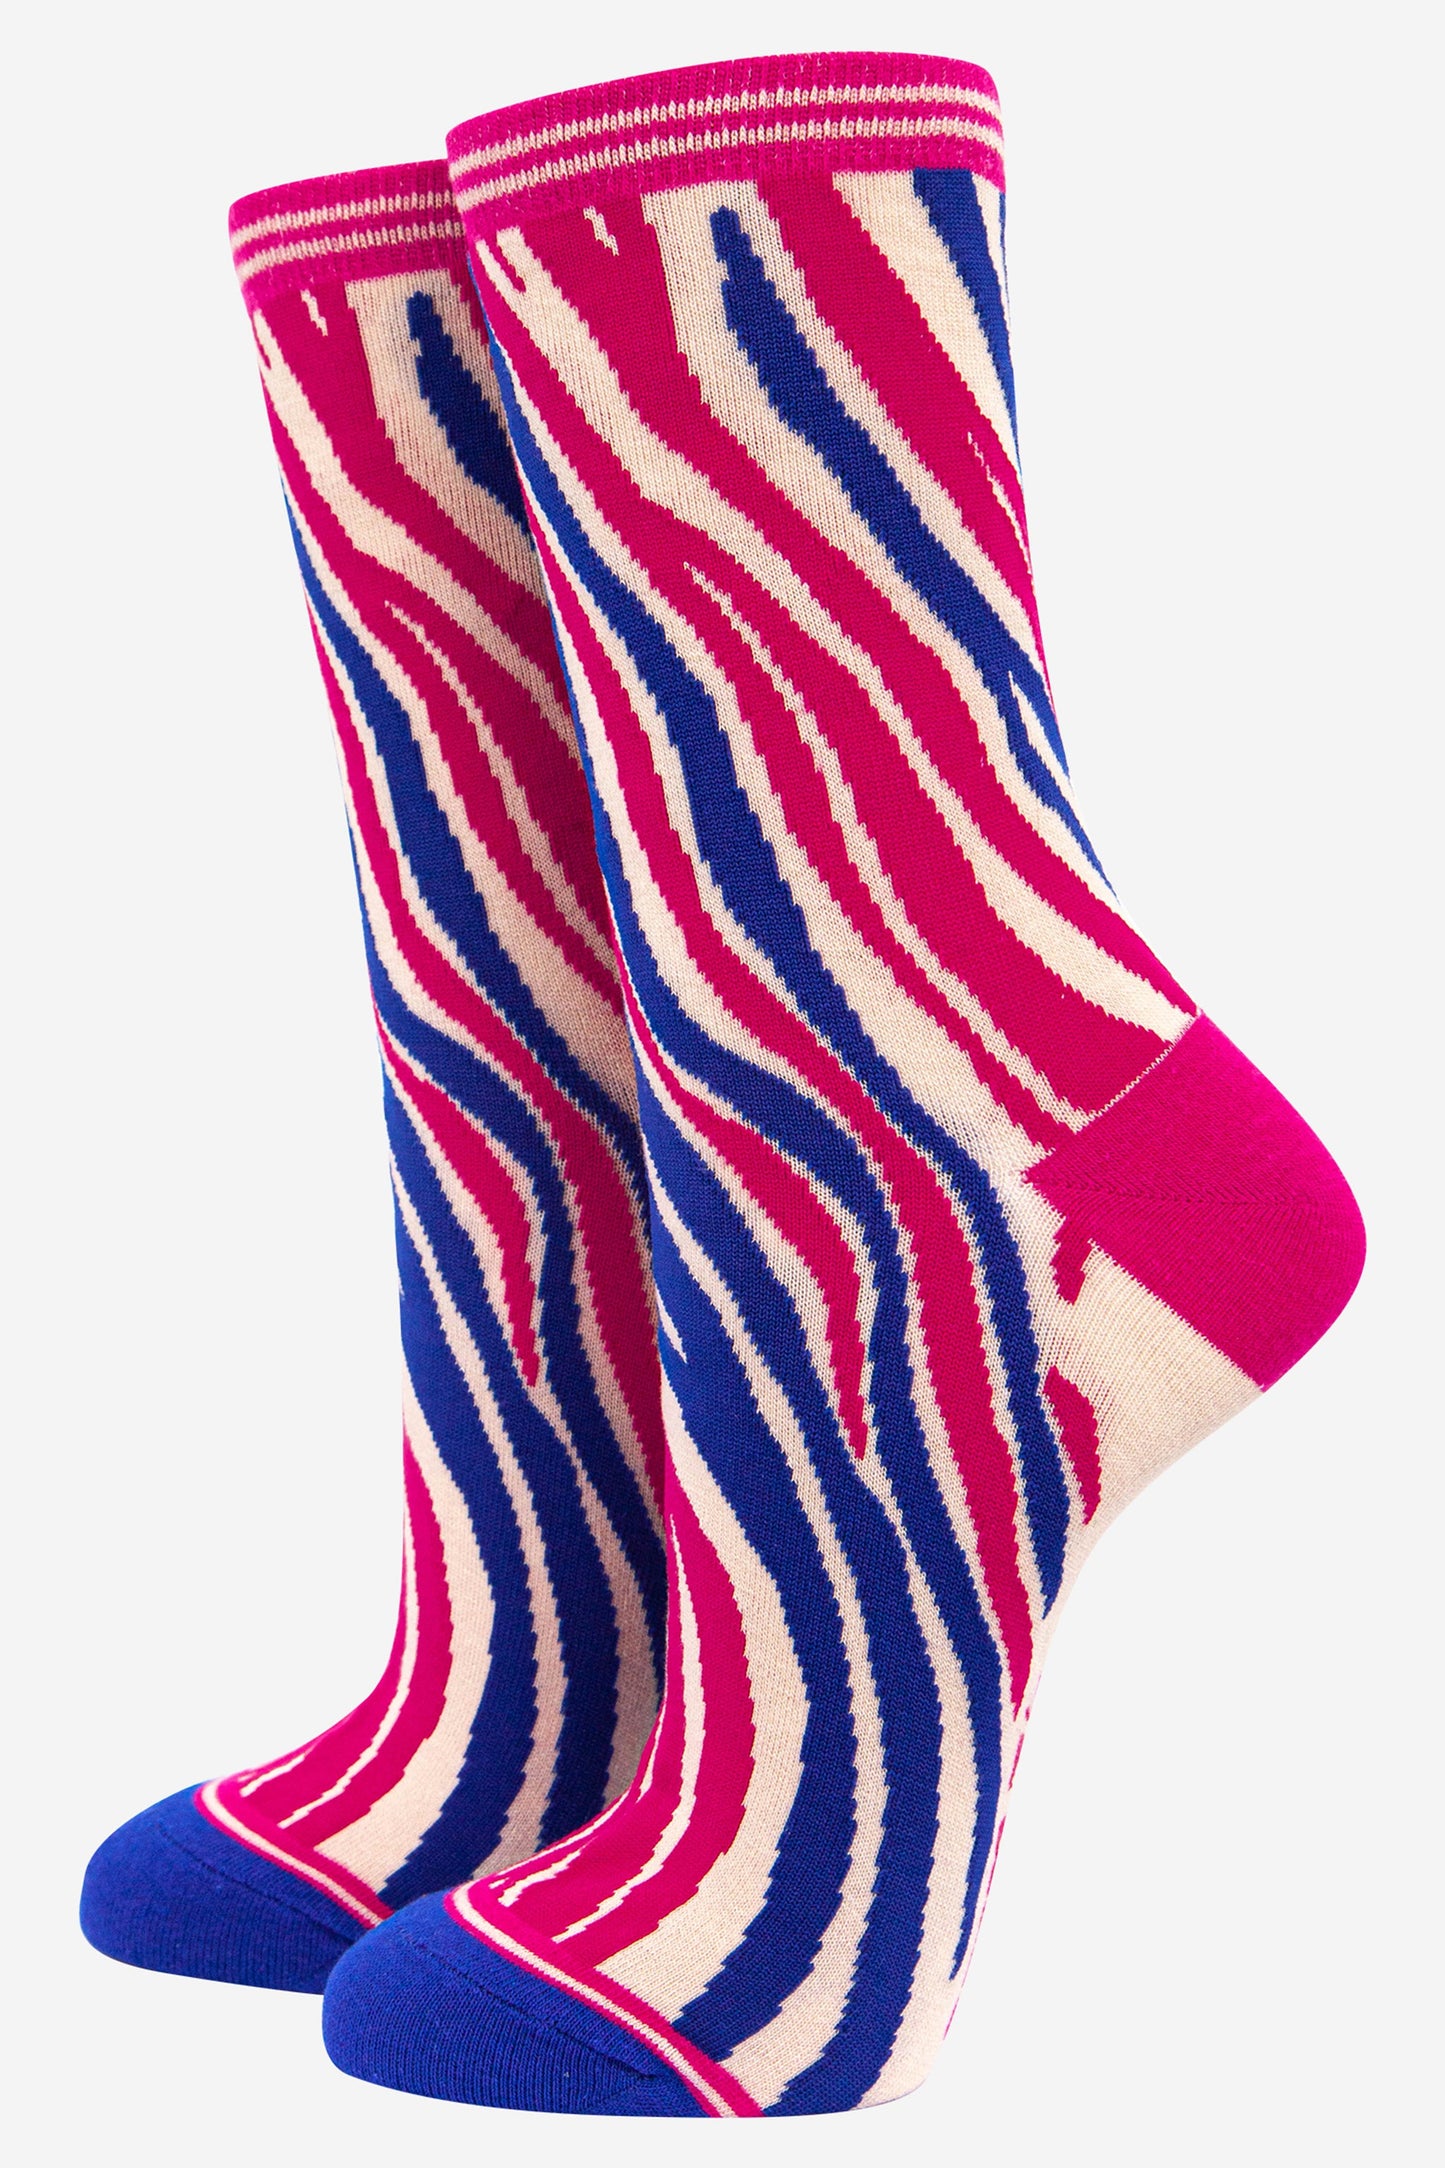 blue and hot pink bamboo socks with an all over zebra animal print pattern